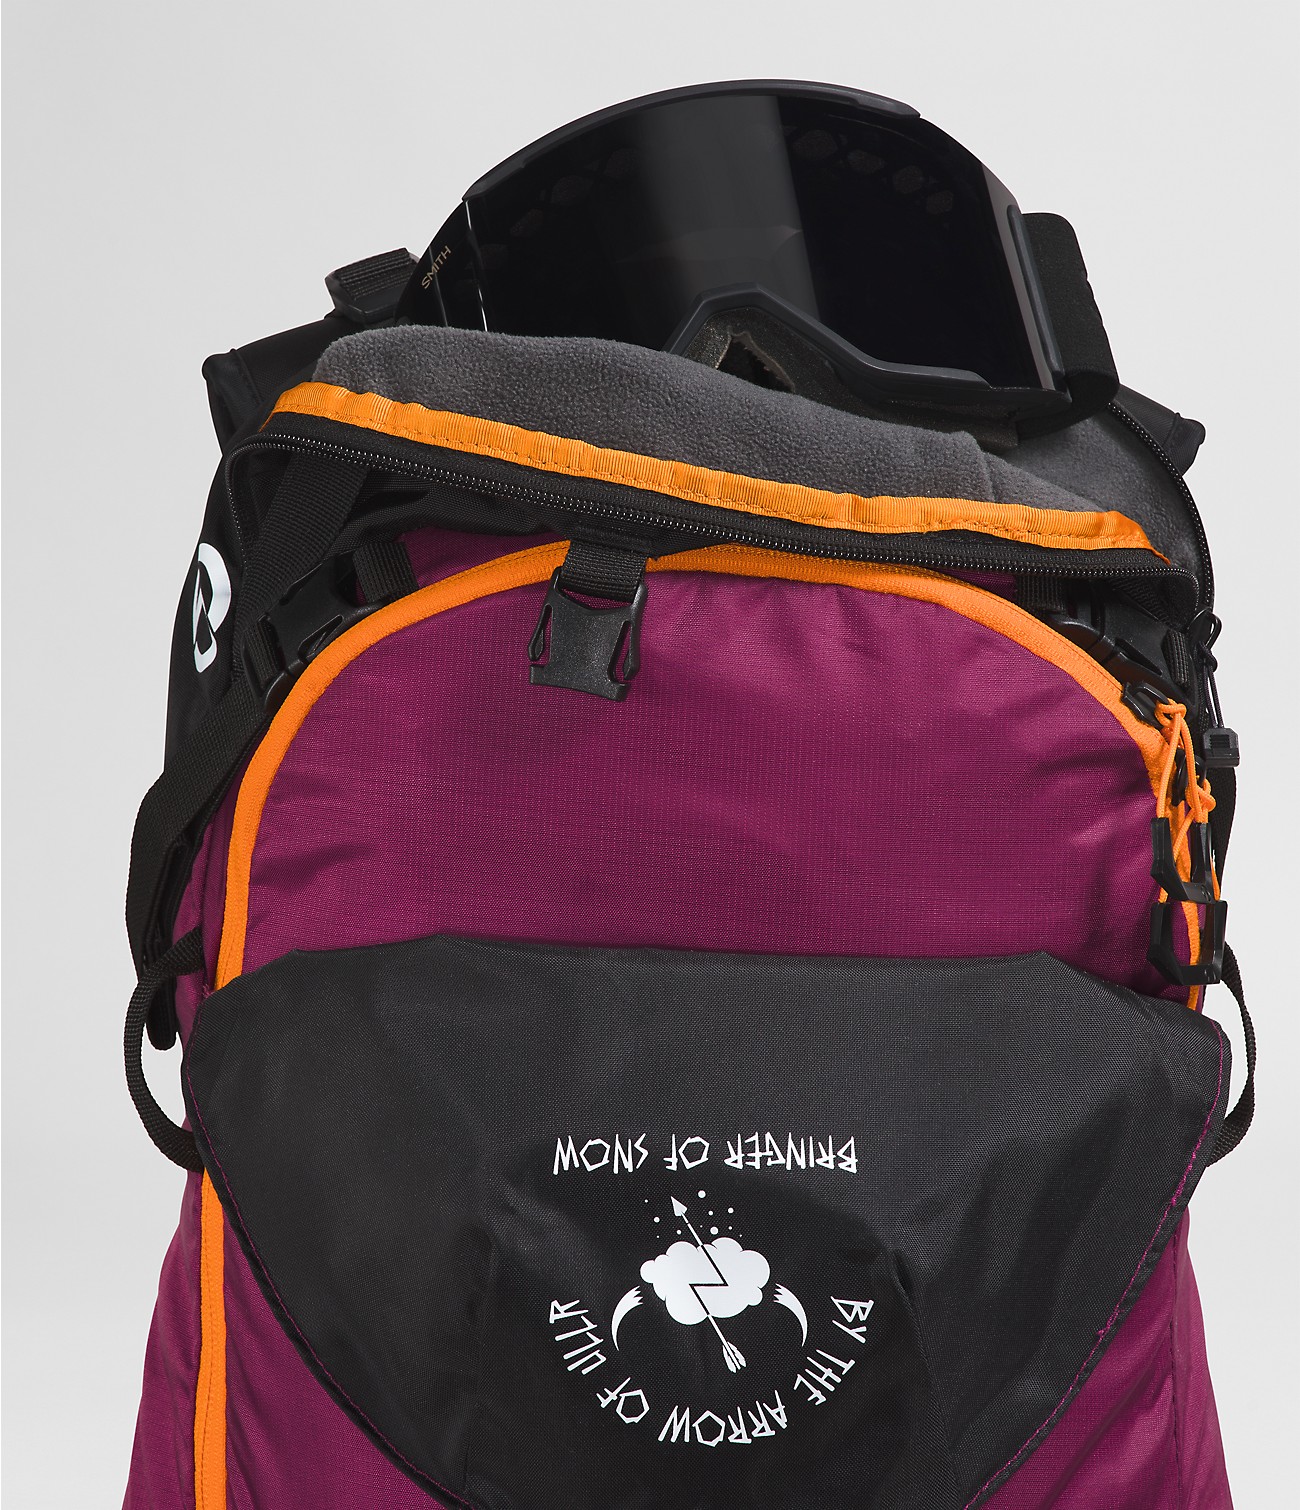 Snomad 23 Backpack | The North Face